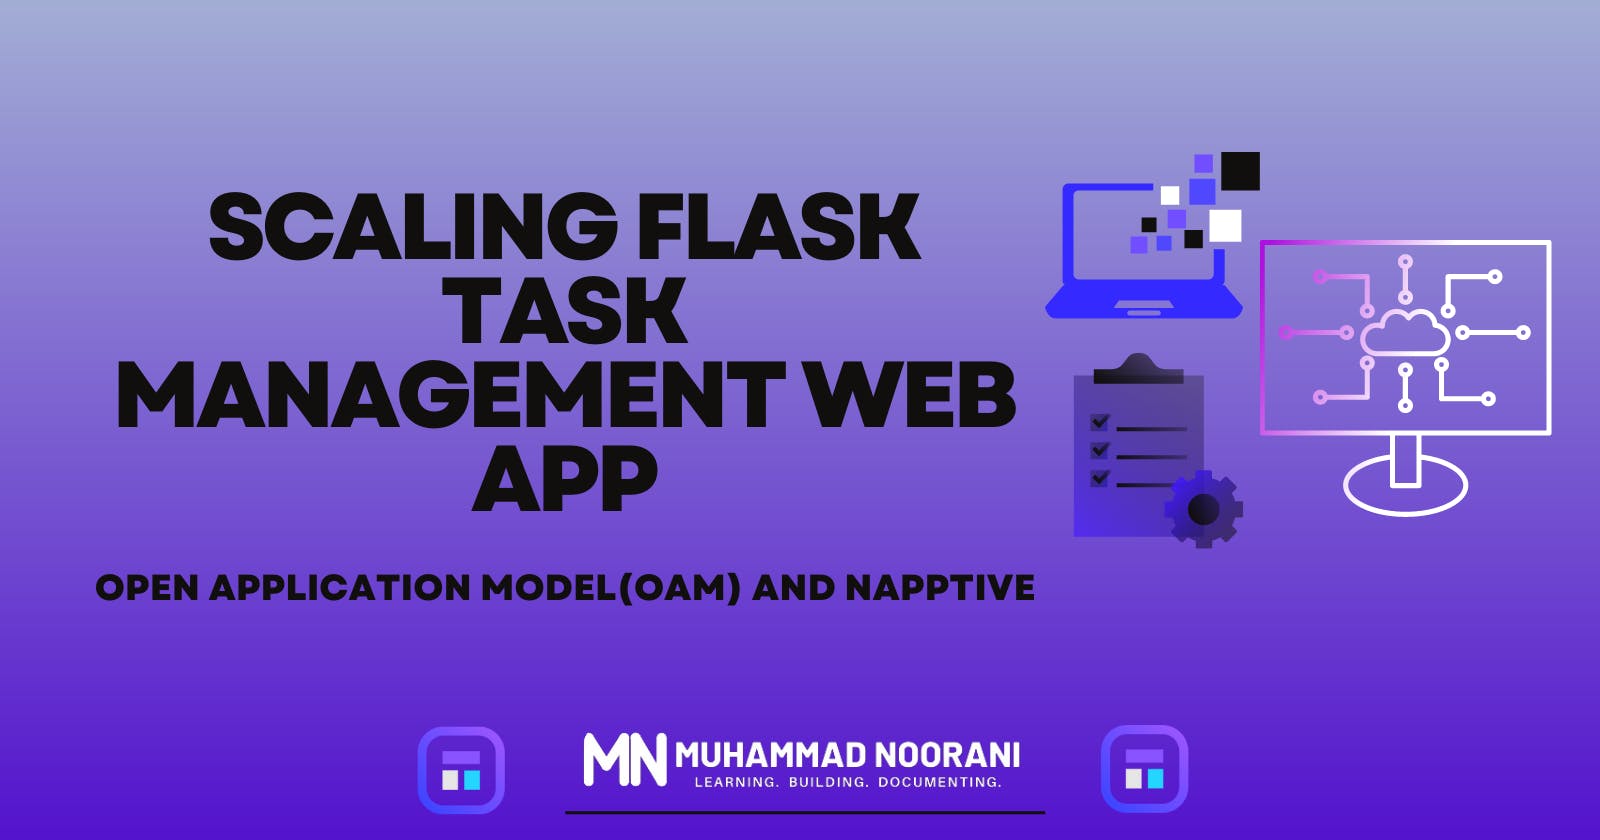 Scaling Flask Task Management Web App with Open Application Model(OAM) and Napptive - A Case Study